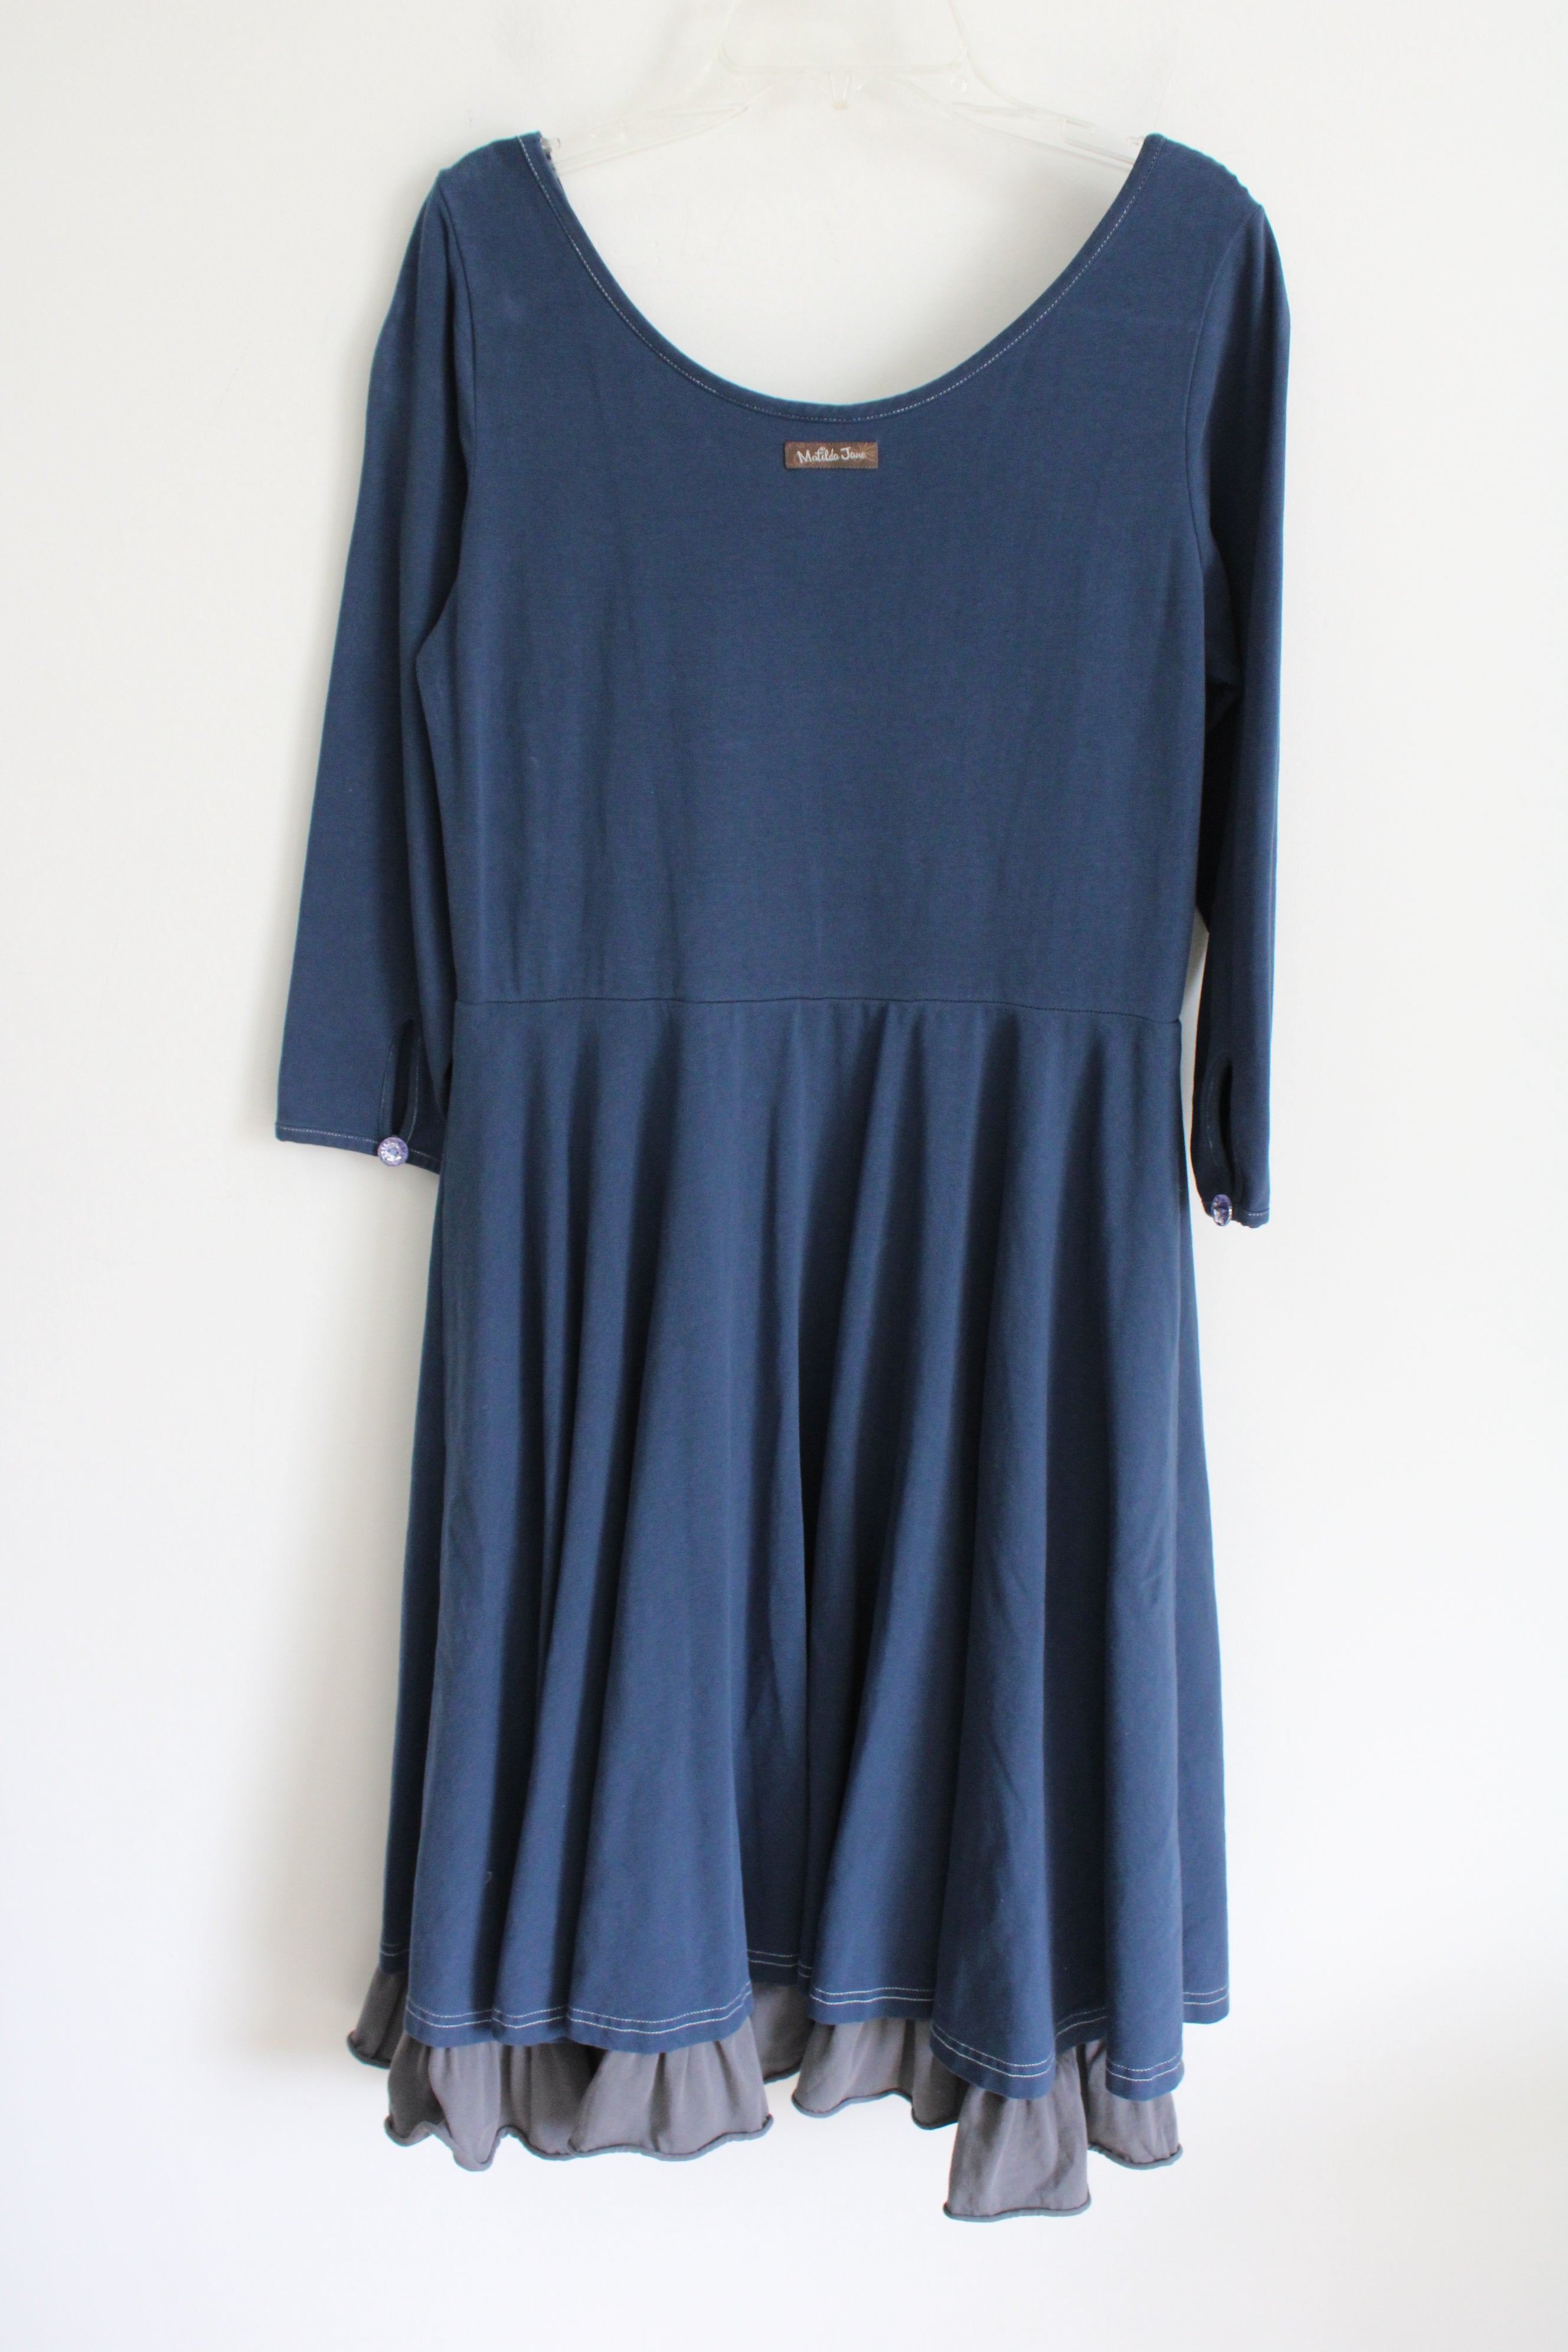 Paint By Numbers Blue Cotton Dress | M